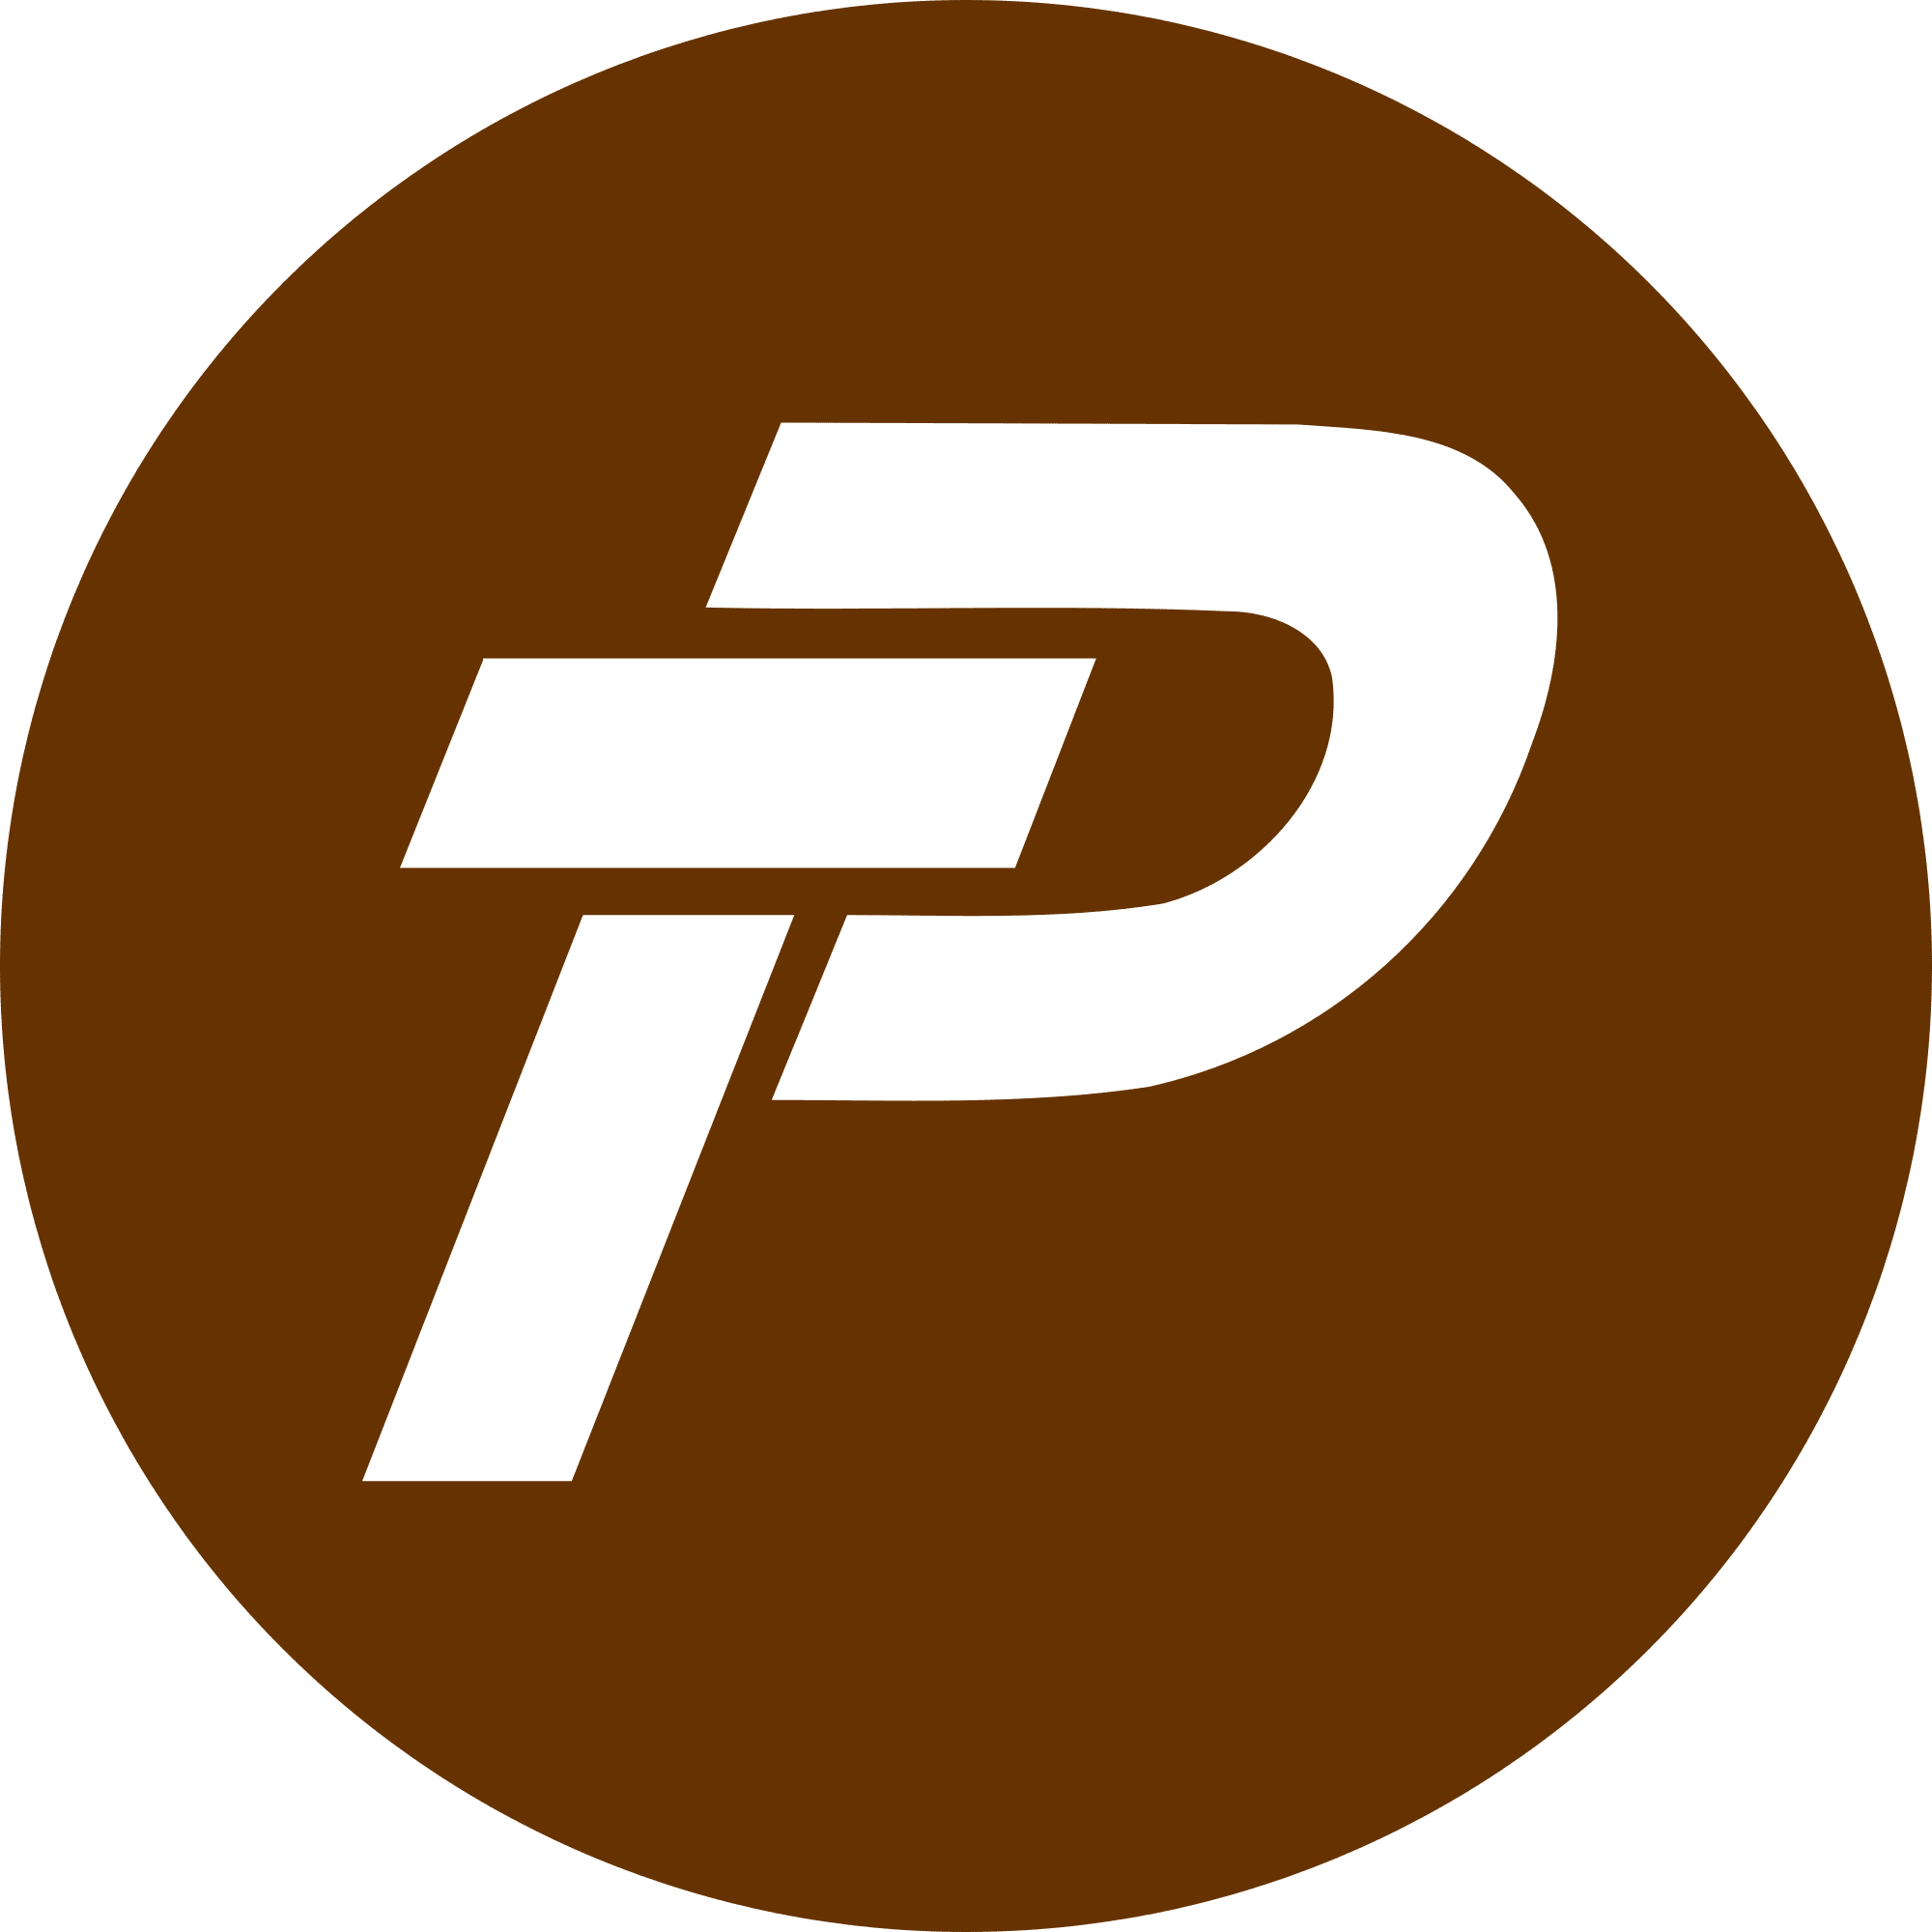 Paypex logo in png format